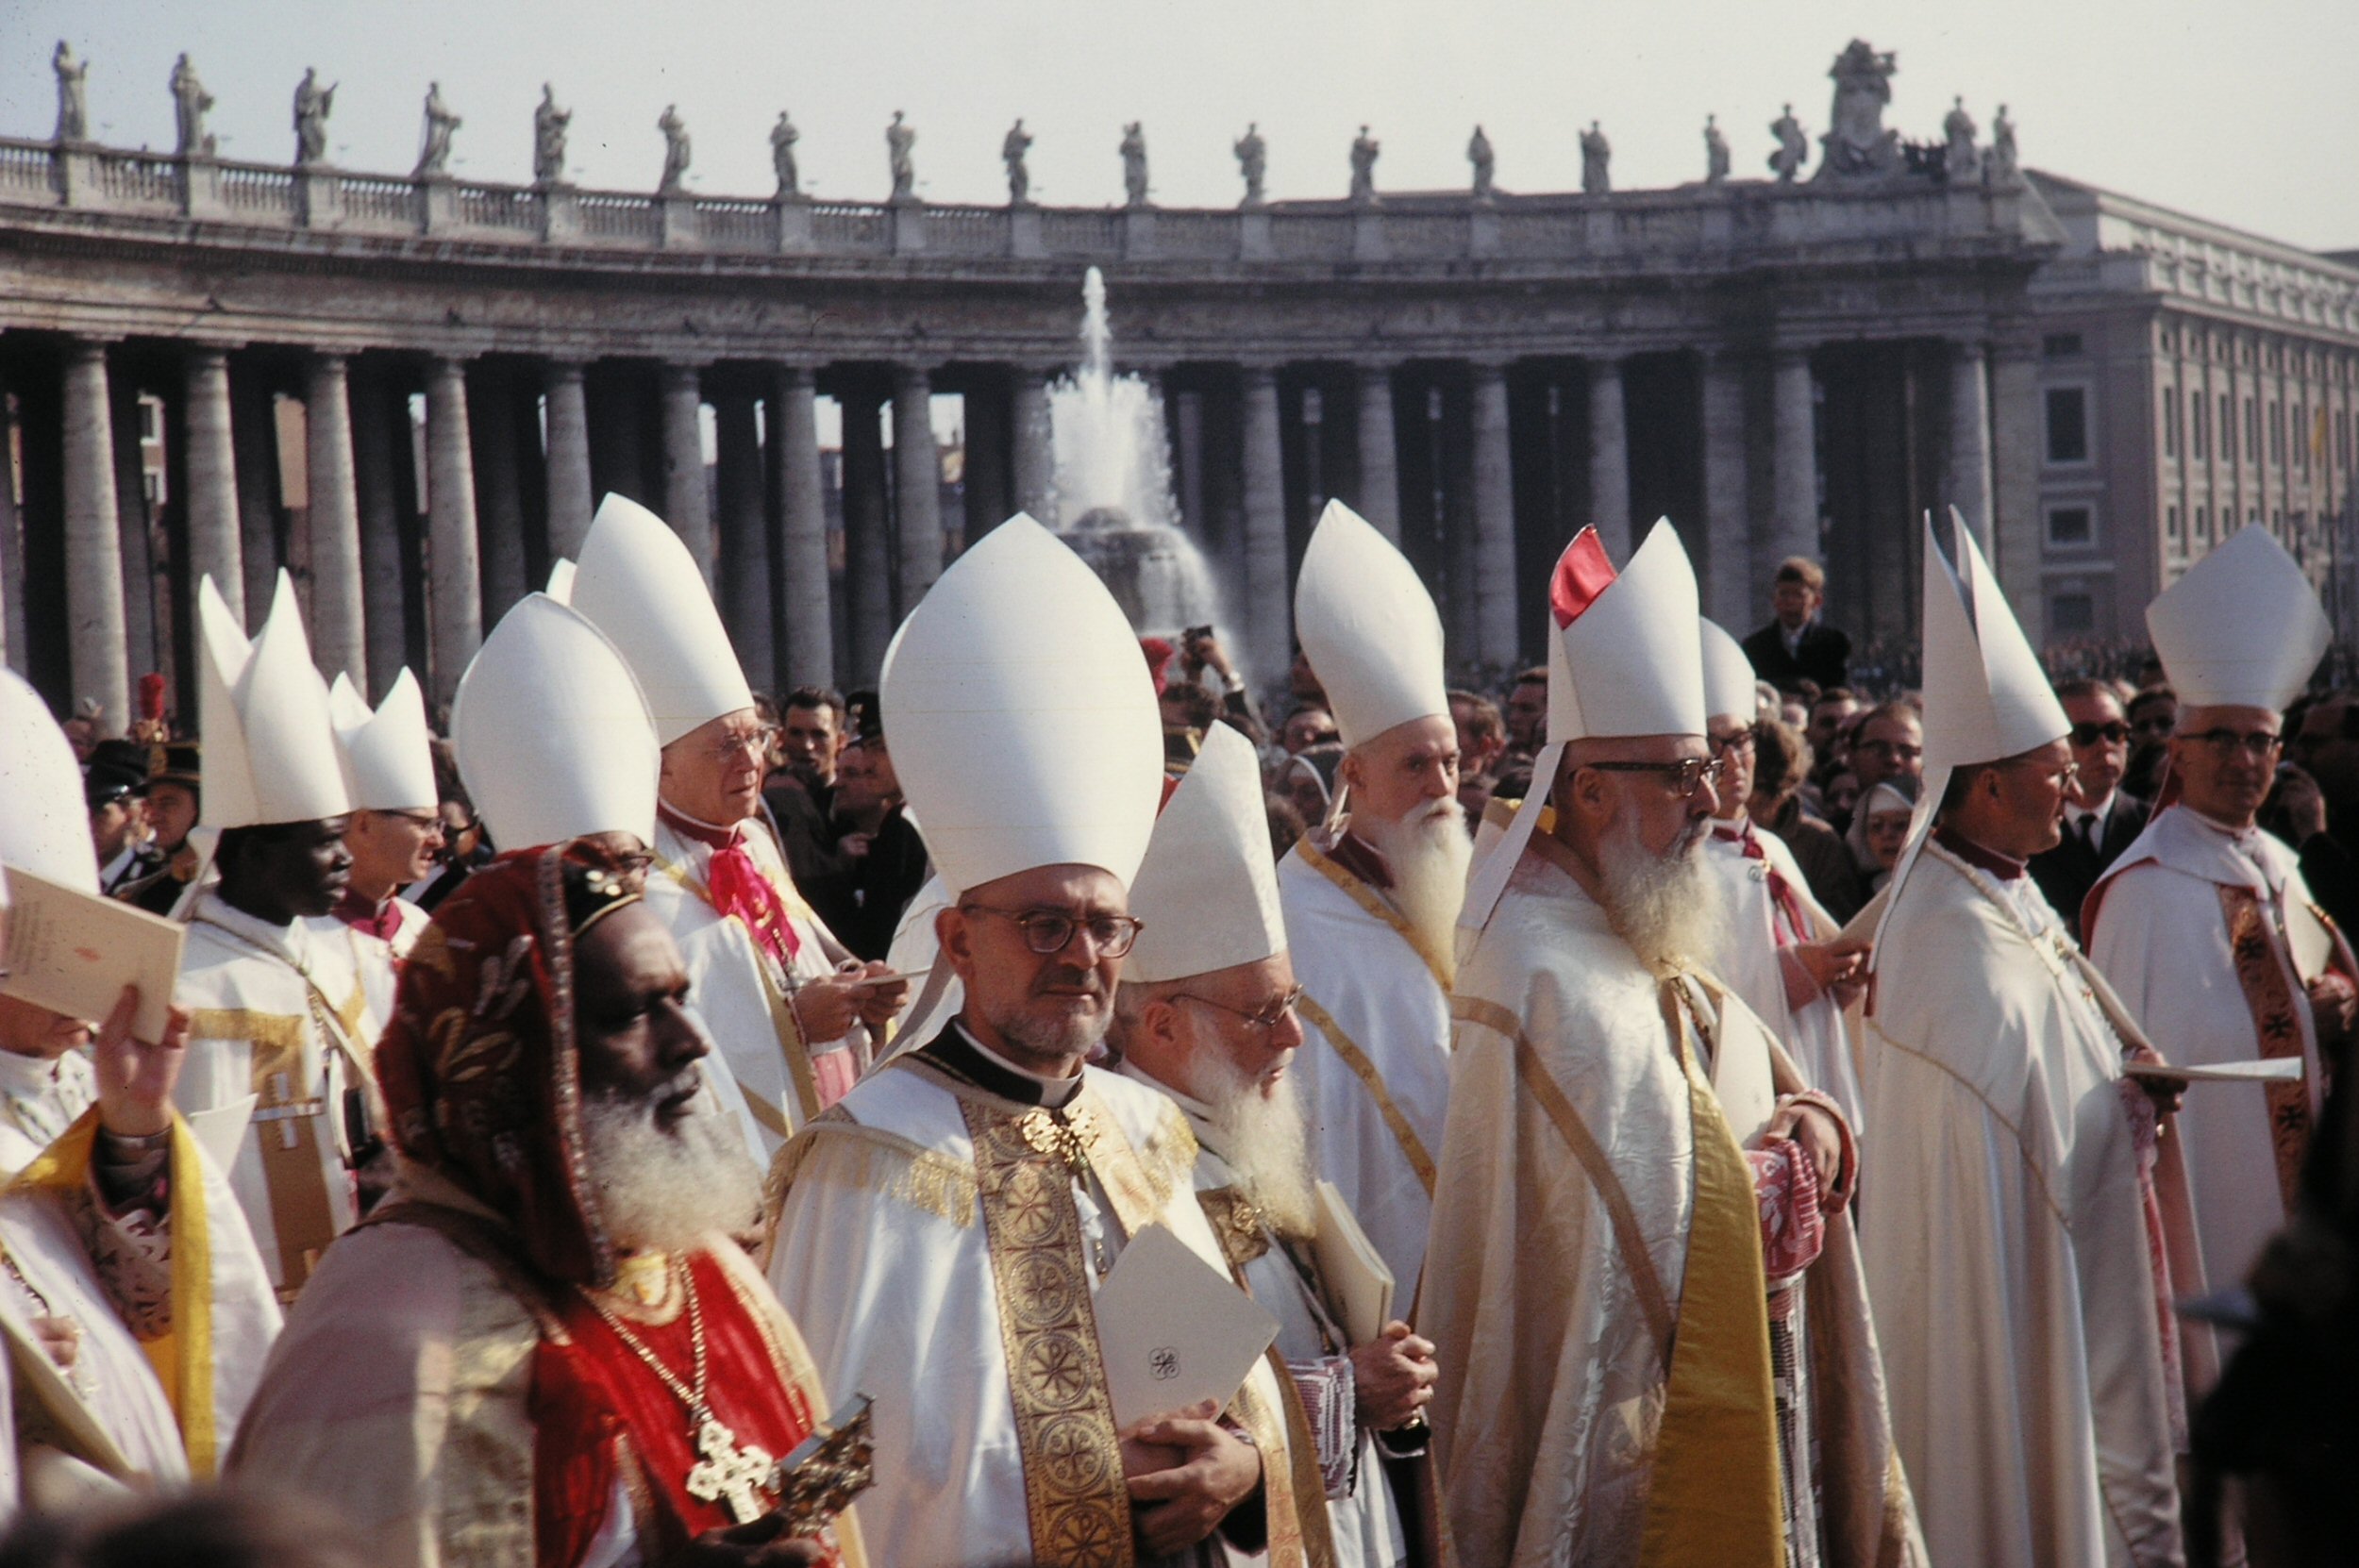 Bishops on Saint Peter's Square for the Opening of the Second Vatican Council